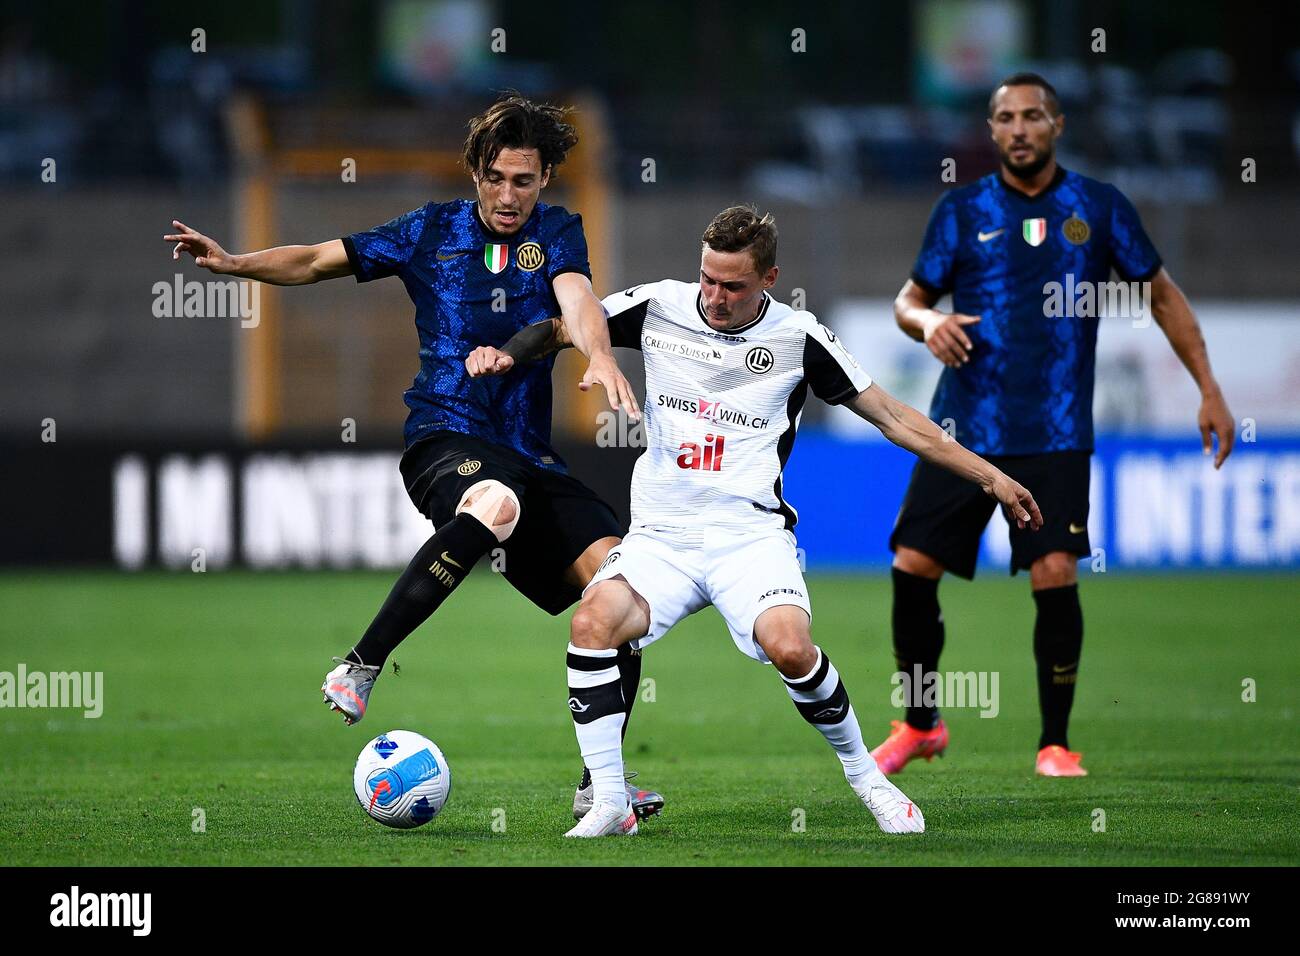 Brussels, Belgium. 24th Aug, 2023. Lugano's Allan Arigoni and Lugano's  Mattia Bottani pictured during a soccer game between Belgian Royale Union  Saint Gilloise and Swiss FC Lugano, Thursday 24 August 2023 in